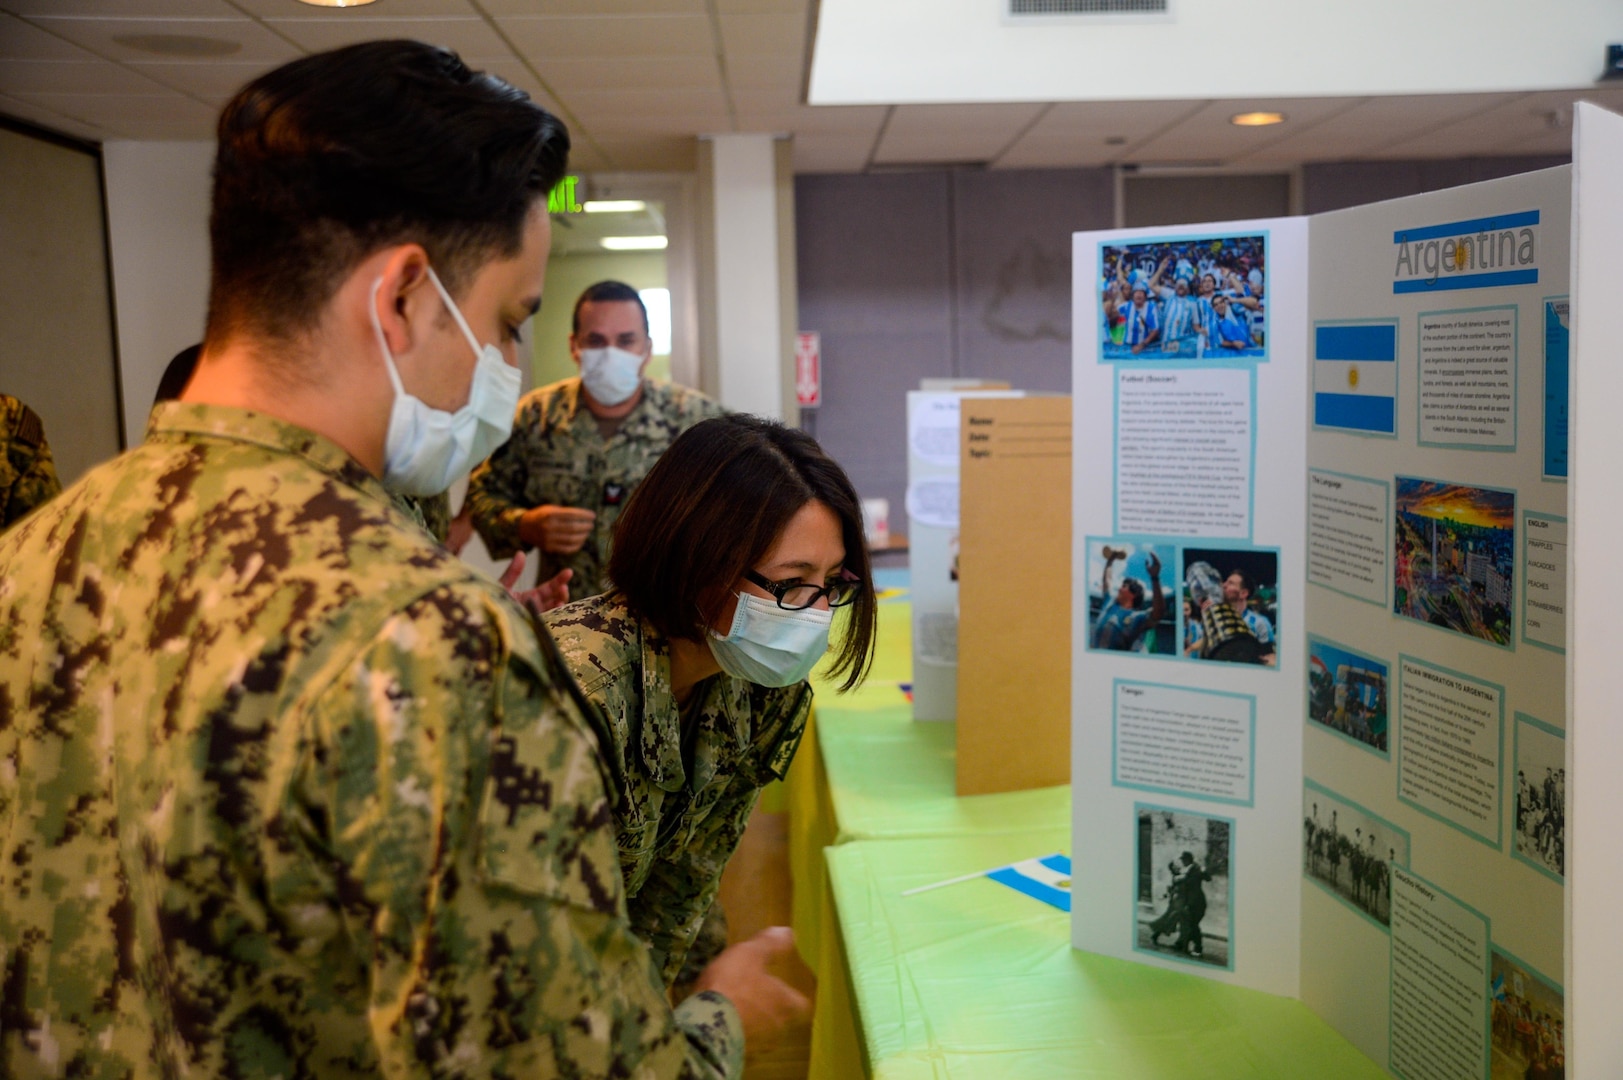 SAN DIEGO (Oct. 5, 2022) Cmdr. Nelly Rice, Navy Medicine Readiness and Training Command San Diego’s acting executive officer (center), views a poster showcasing Argentinian culture with Hospitalman Luis Trejo (left), during a Hispanic Heritage Month event hosted by NMRTC San Diego’s Diversity Committee Team at the hospital, Oct. 5 2022. NMRTC San Diego's mission is to prepare service members to deploy in support of operational forces, deliver high quality healthcare services and shape the future of military medicine through education, training and research. NMRTC San Diego employs more than 6,000 active duty military personnel, civilians and contractors in Southern California to provide patients with world-class care anytime, anywhere. (U.S. Navy photo by Mass Communication Specialist 3rd Class Raphael McCorey)